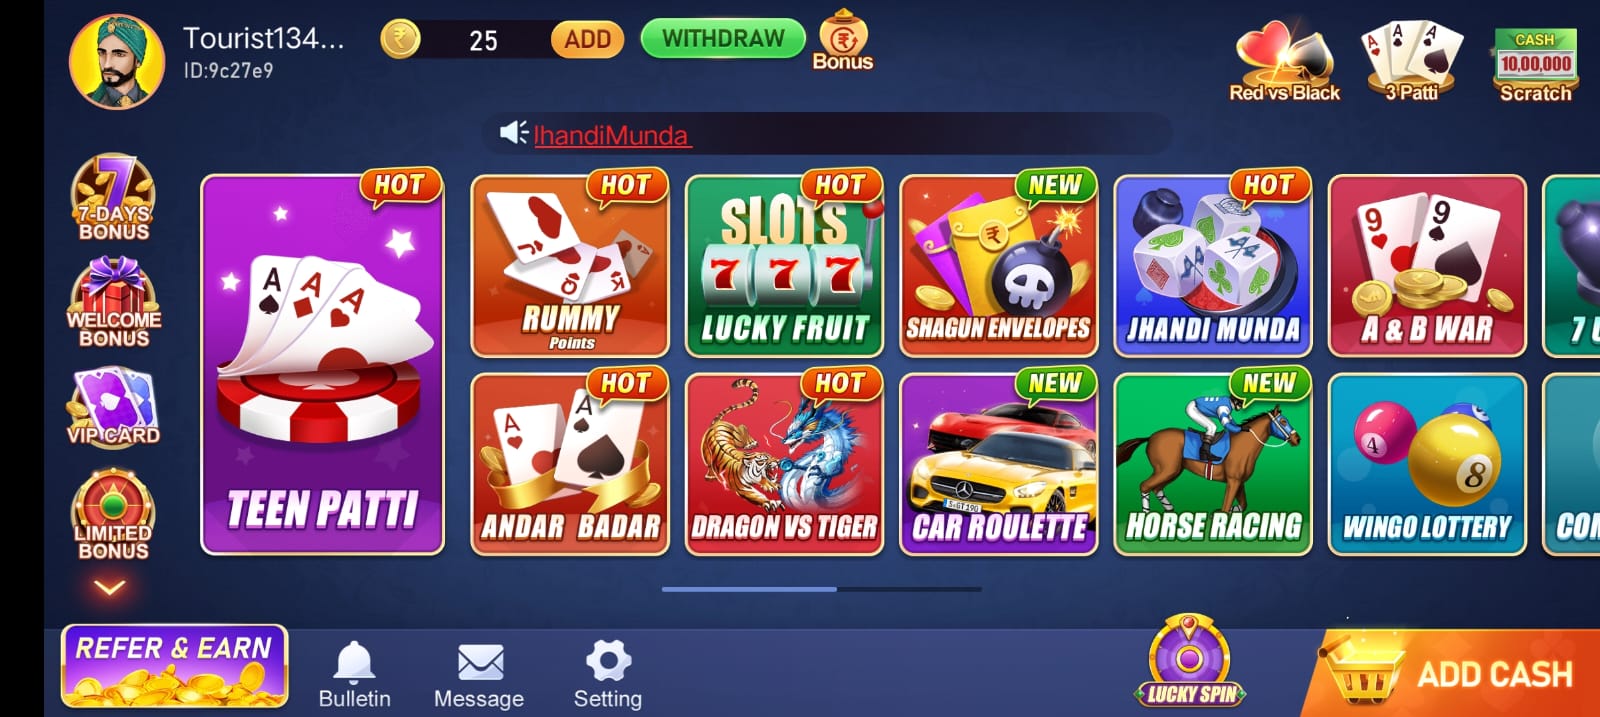 Available Games On Rummy Wala App